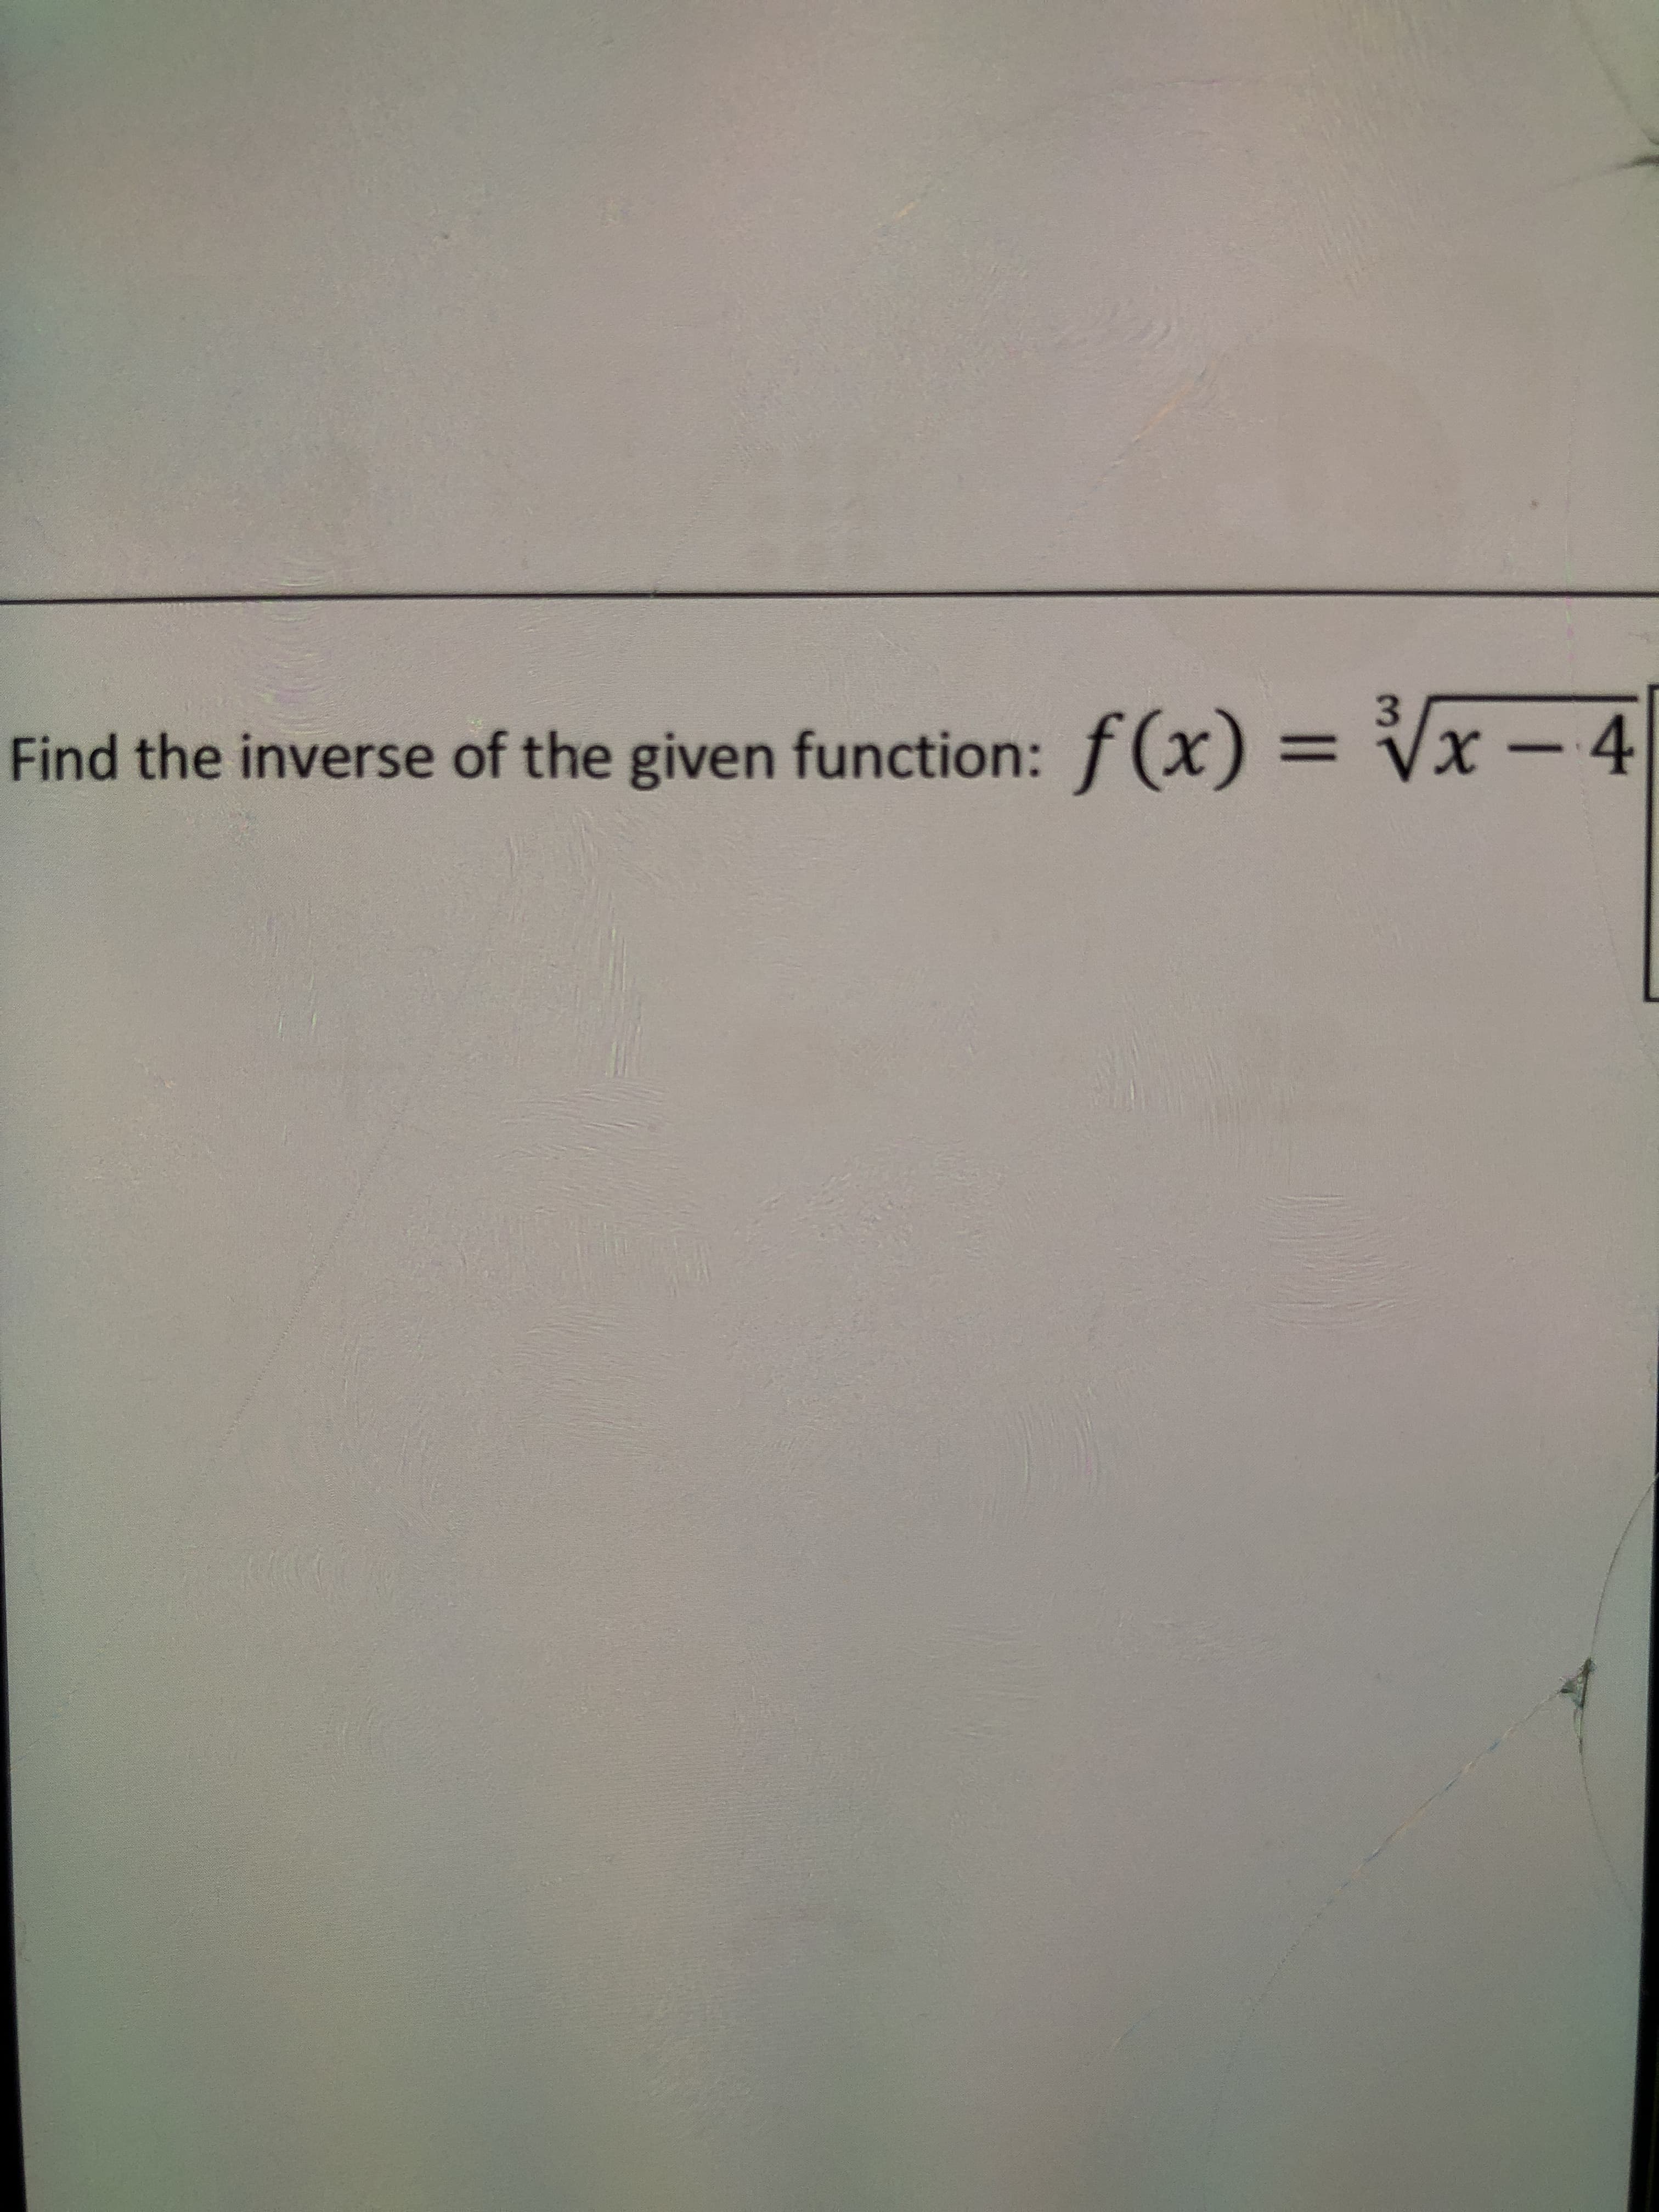 Find the inverse of the given function: f(x) = Vx -4
%3D
